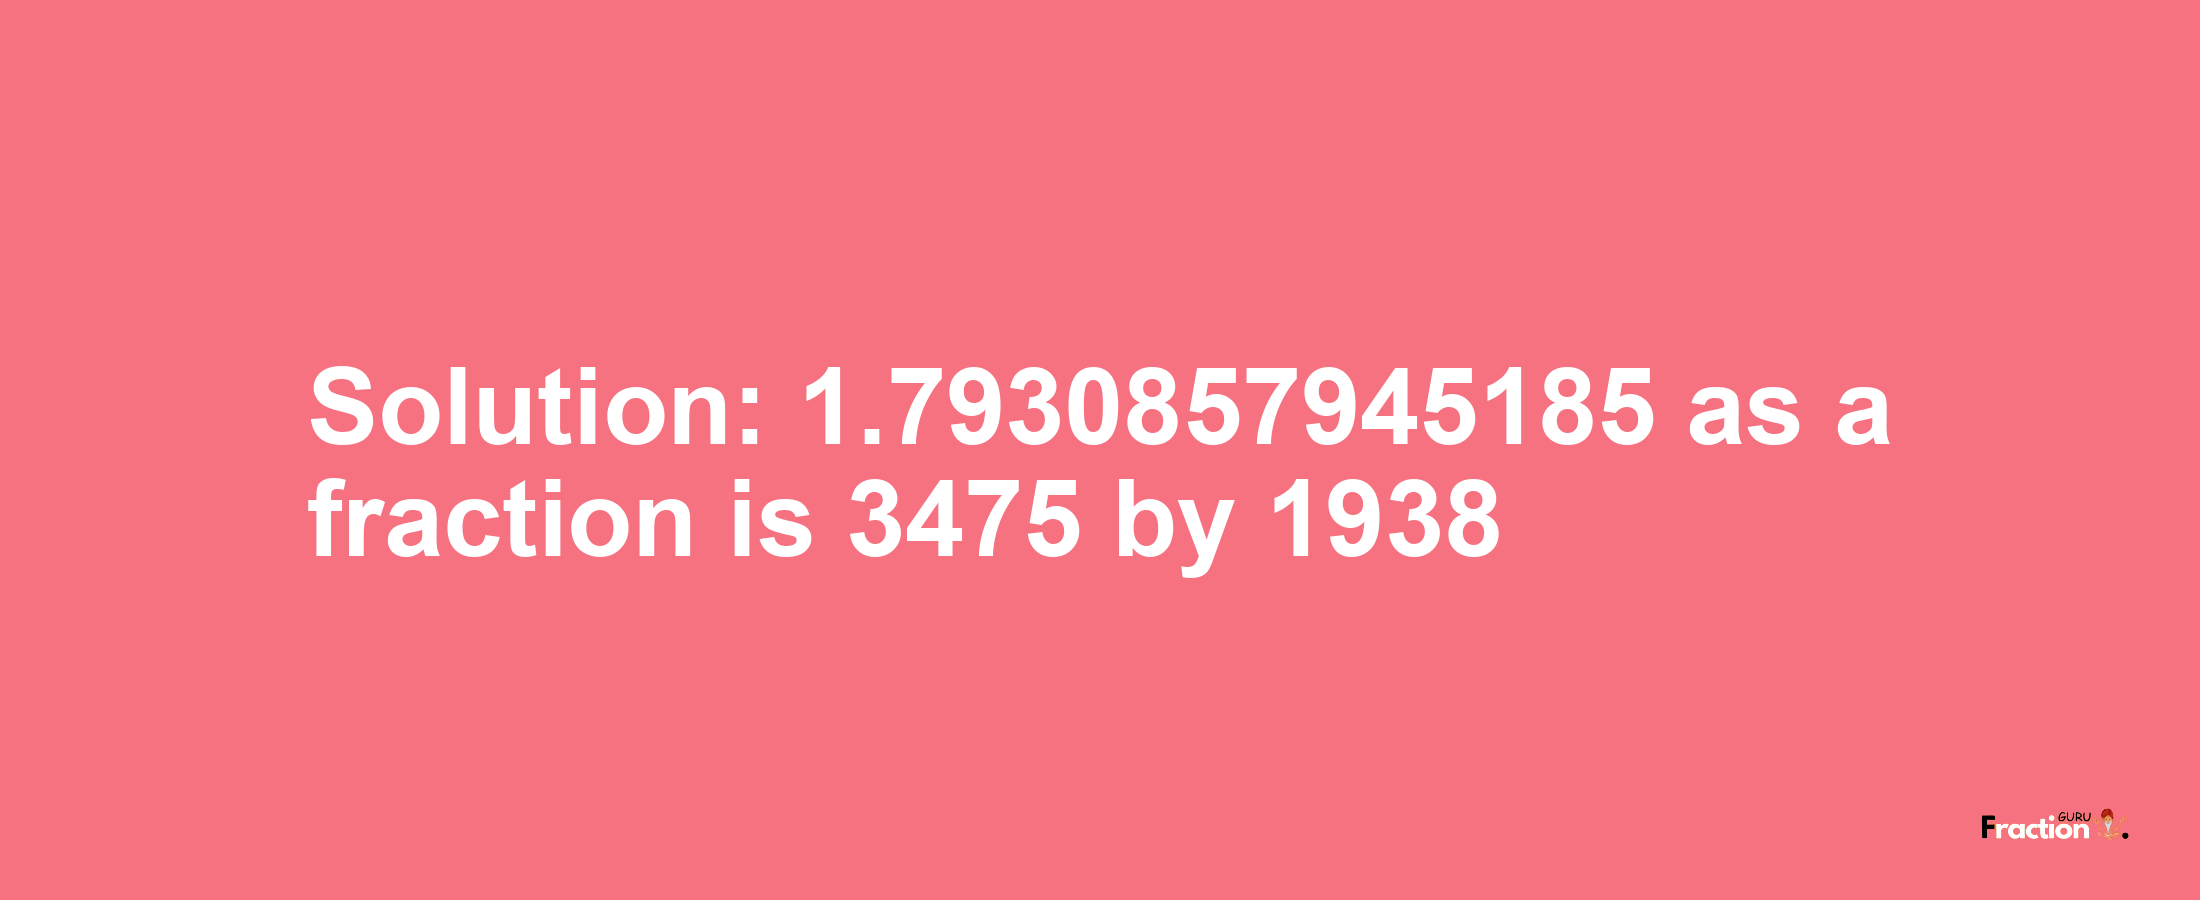 Solution:1.7930857945185 as a fraction is 3475/1938